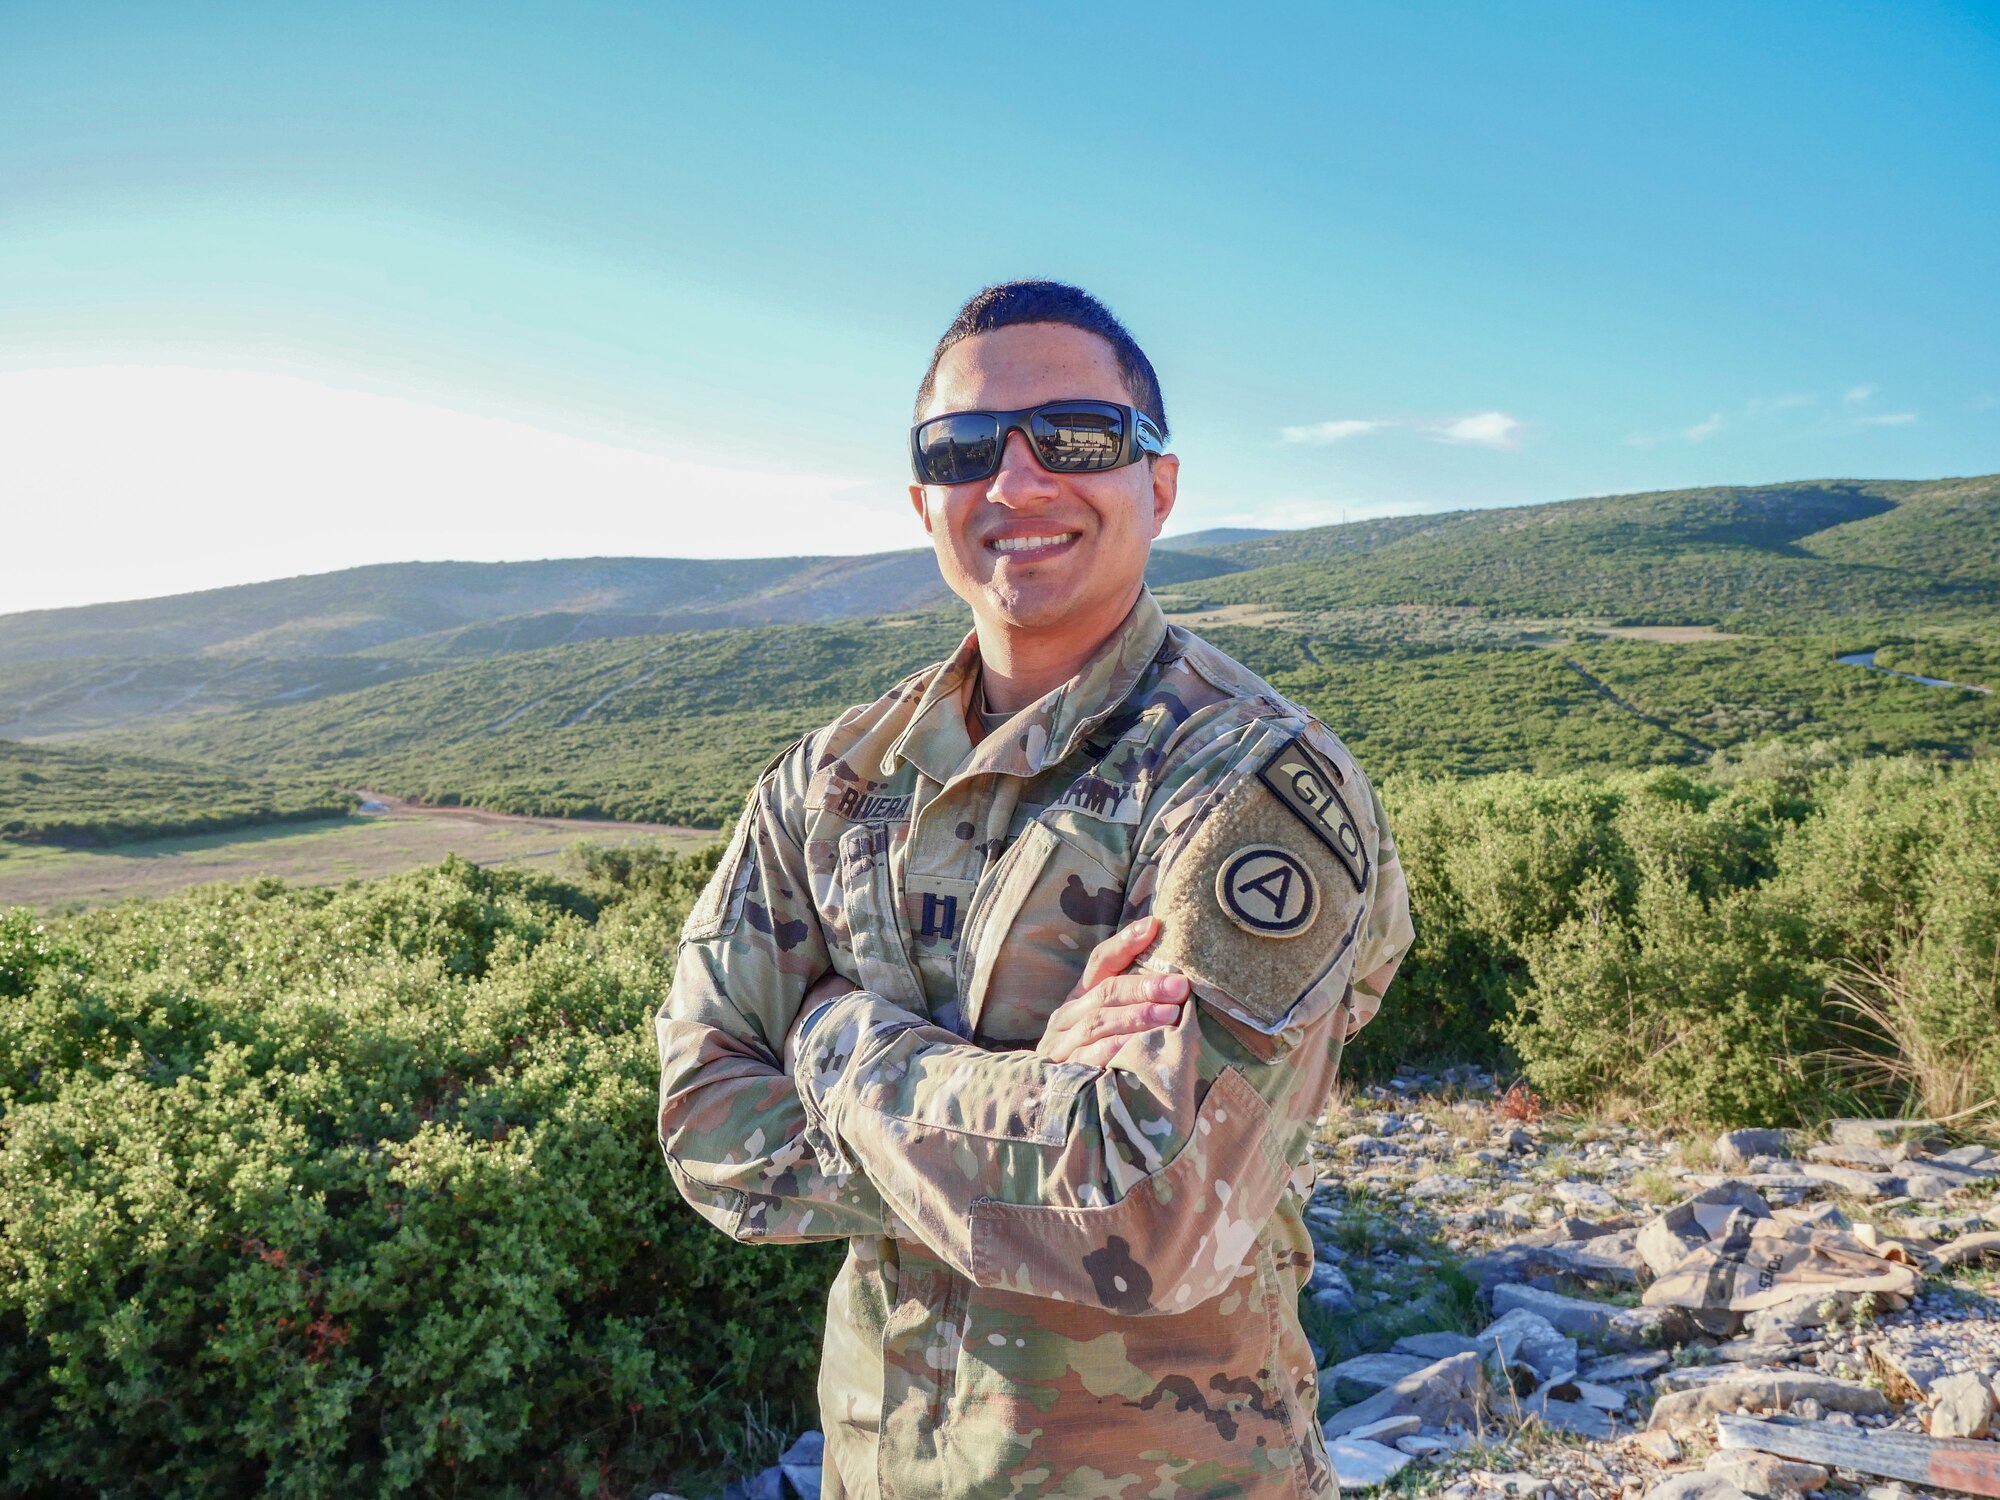 U.S. Army Capt. Luis Antonio Rivera, 9th Expeditionary Bomb Squadron ground liaison officer, poses for a photo during a joint exercise. The GLO is responsible for facilitating communication between ground units and air support. (U.S. Air Force photo by Capt. Jaclyn Sumayao)